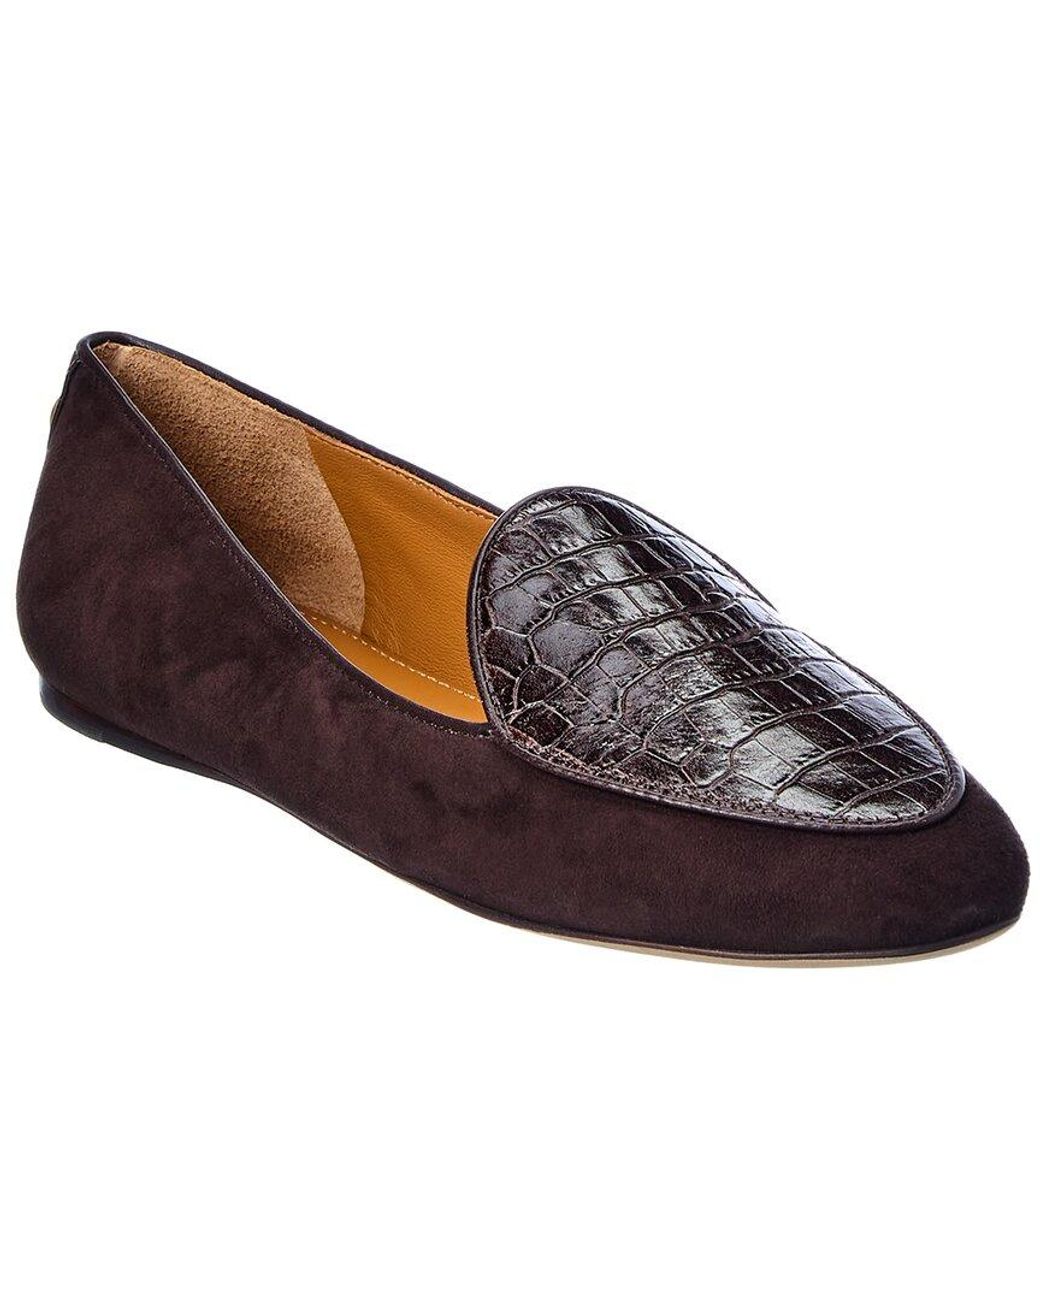 Tory Burch Benton Suede & Croc-embossed Leather Loafer in Brown | Lyst